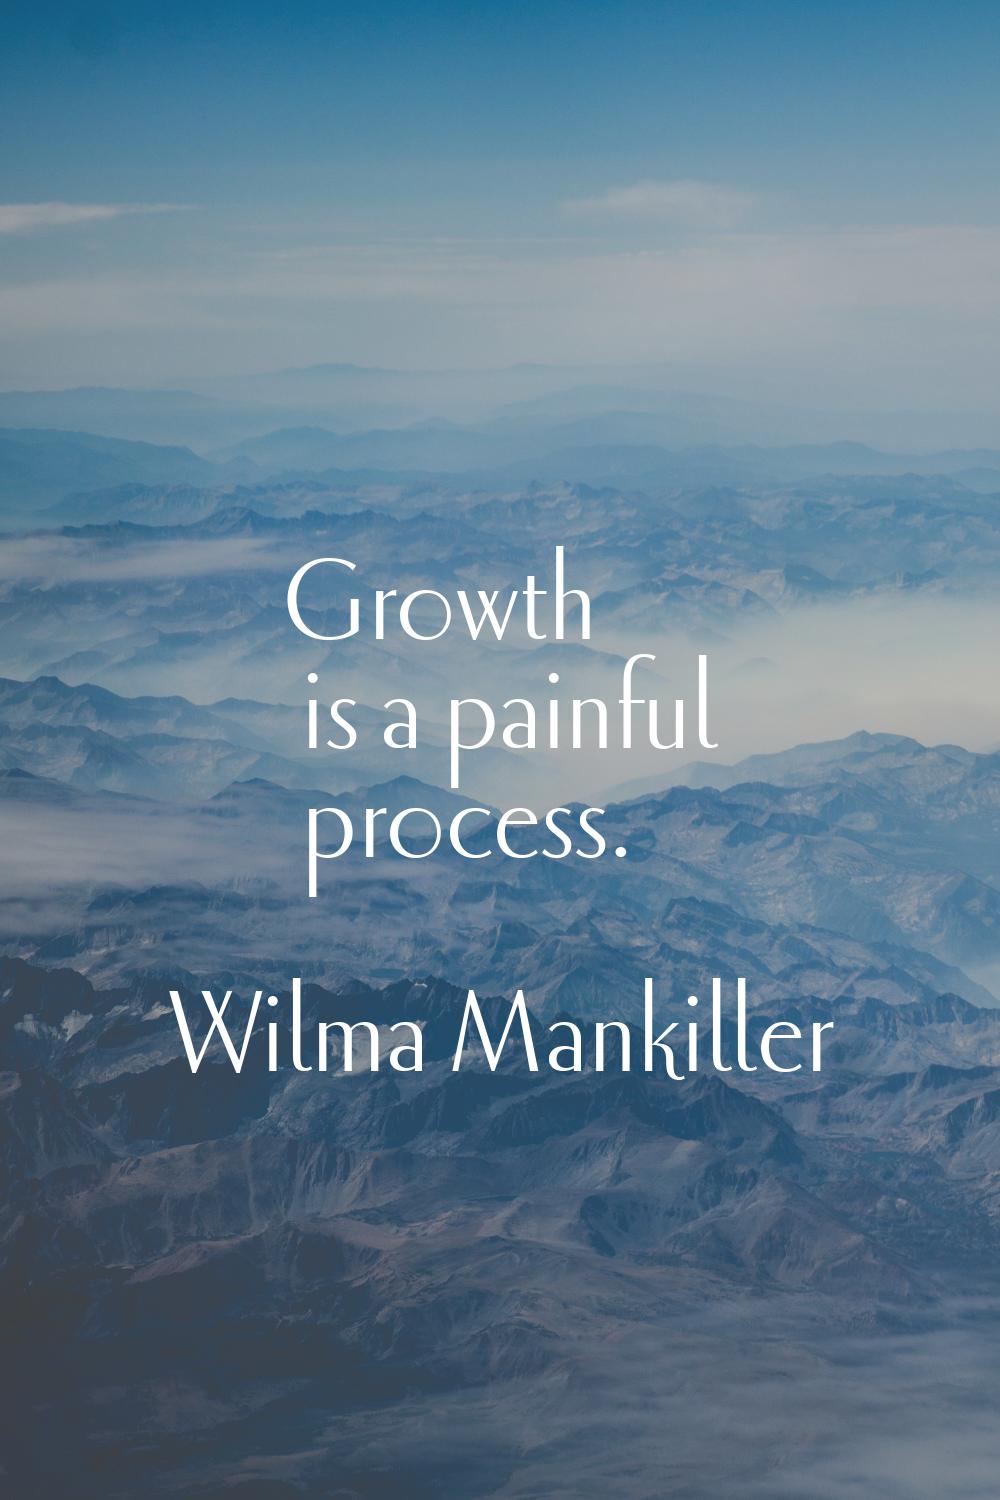 Growth is a painful process.